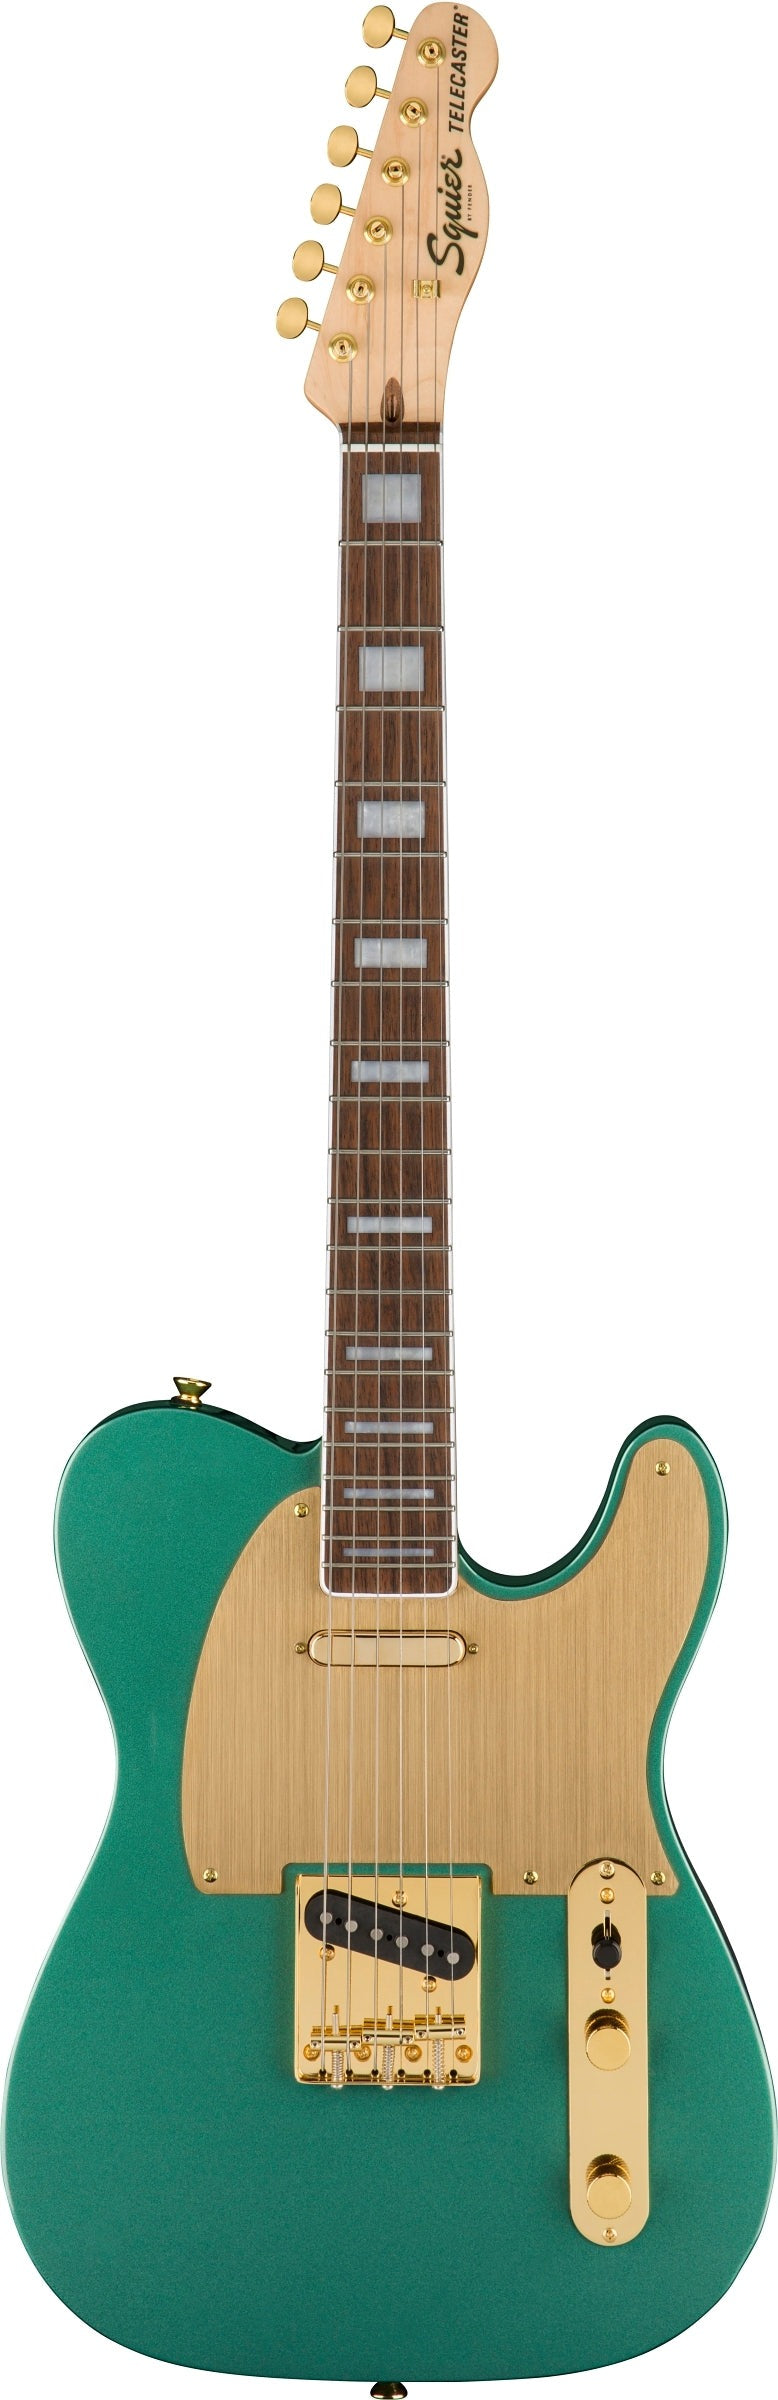 Squier 40th Anniversary Gold Edition Telecaster Electric Guitar - Sherwood Green